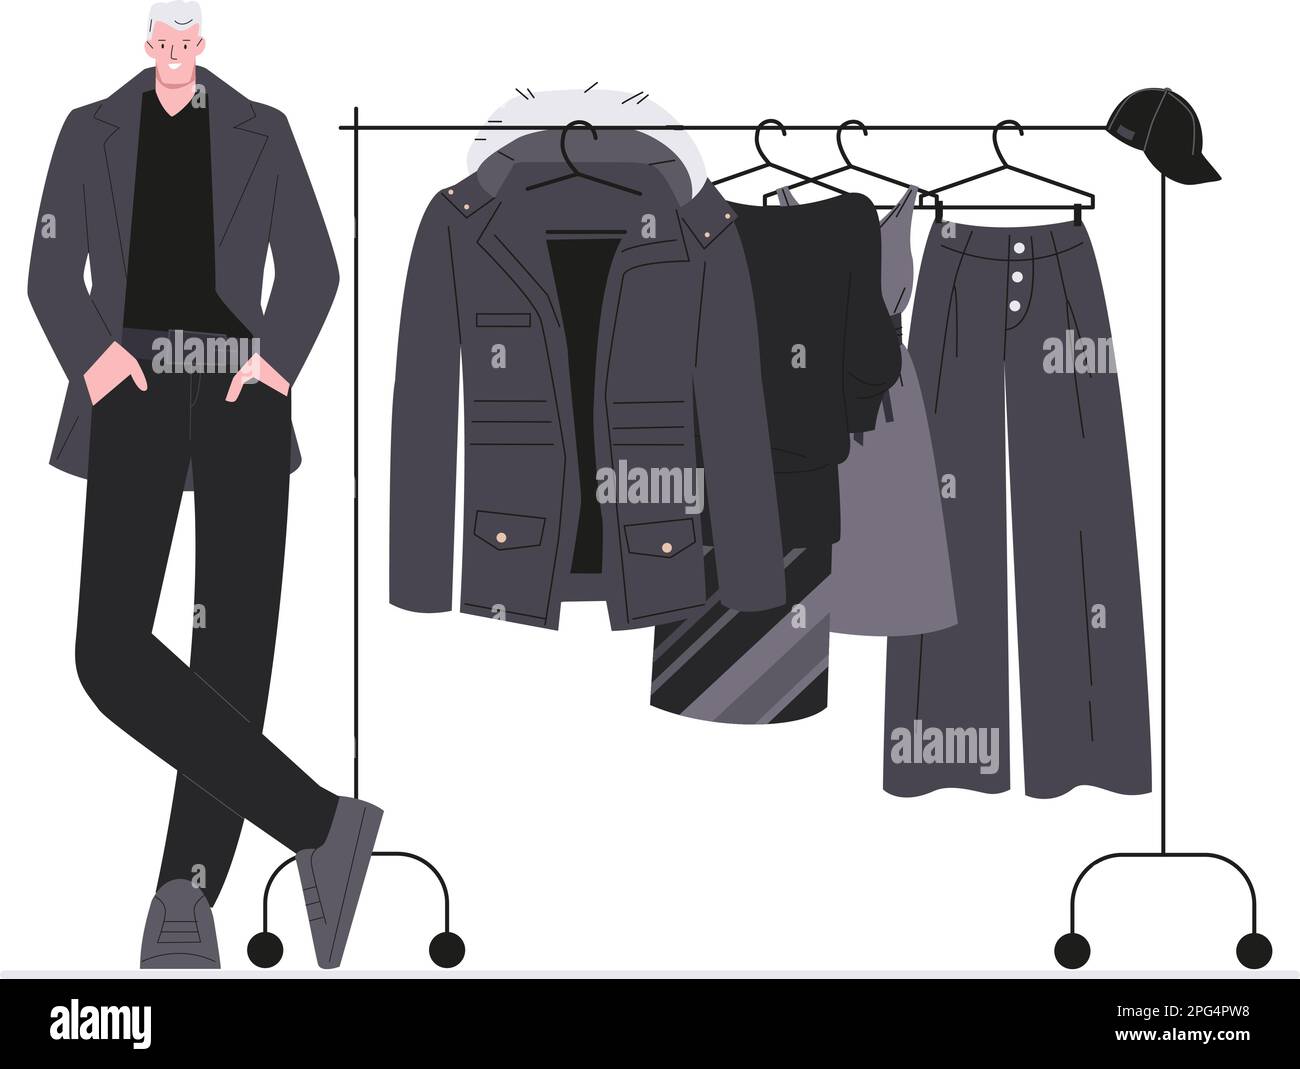 Man clothes and accessories collection - fashion wardrobe - vector